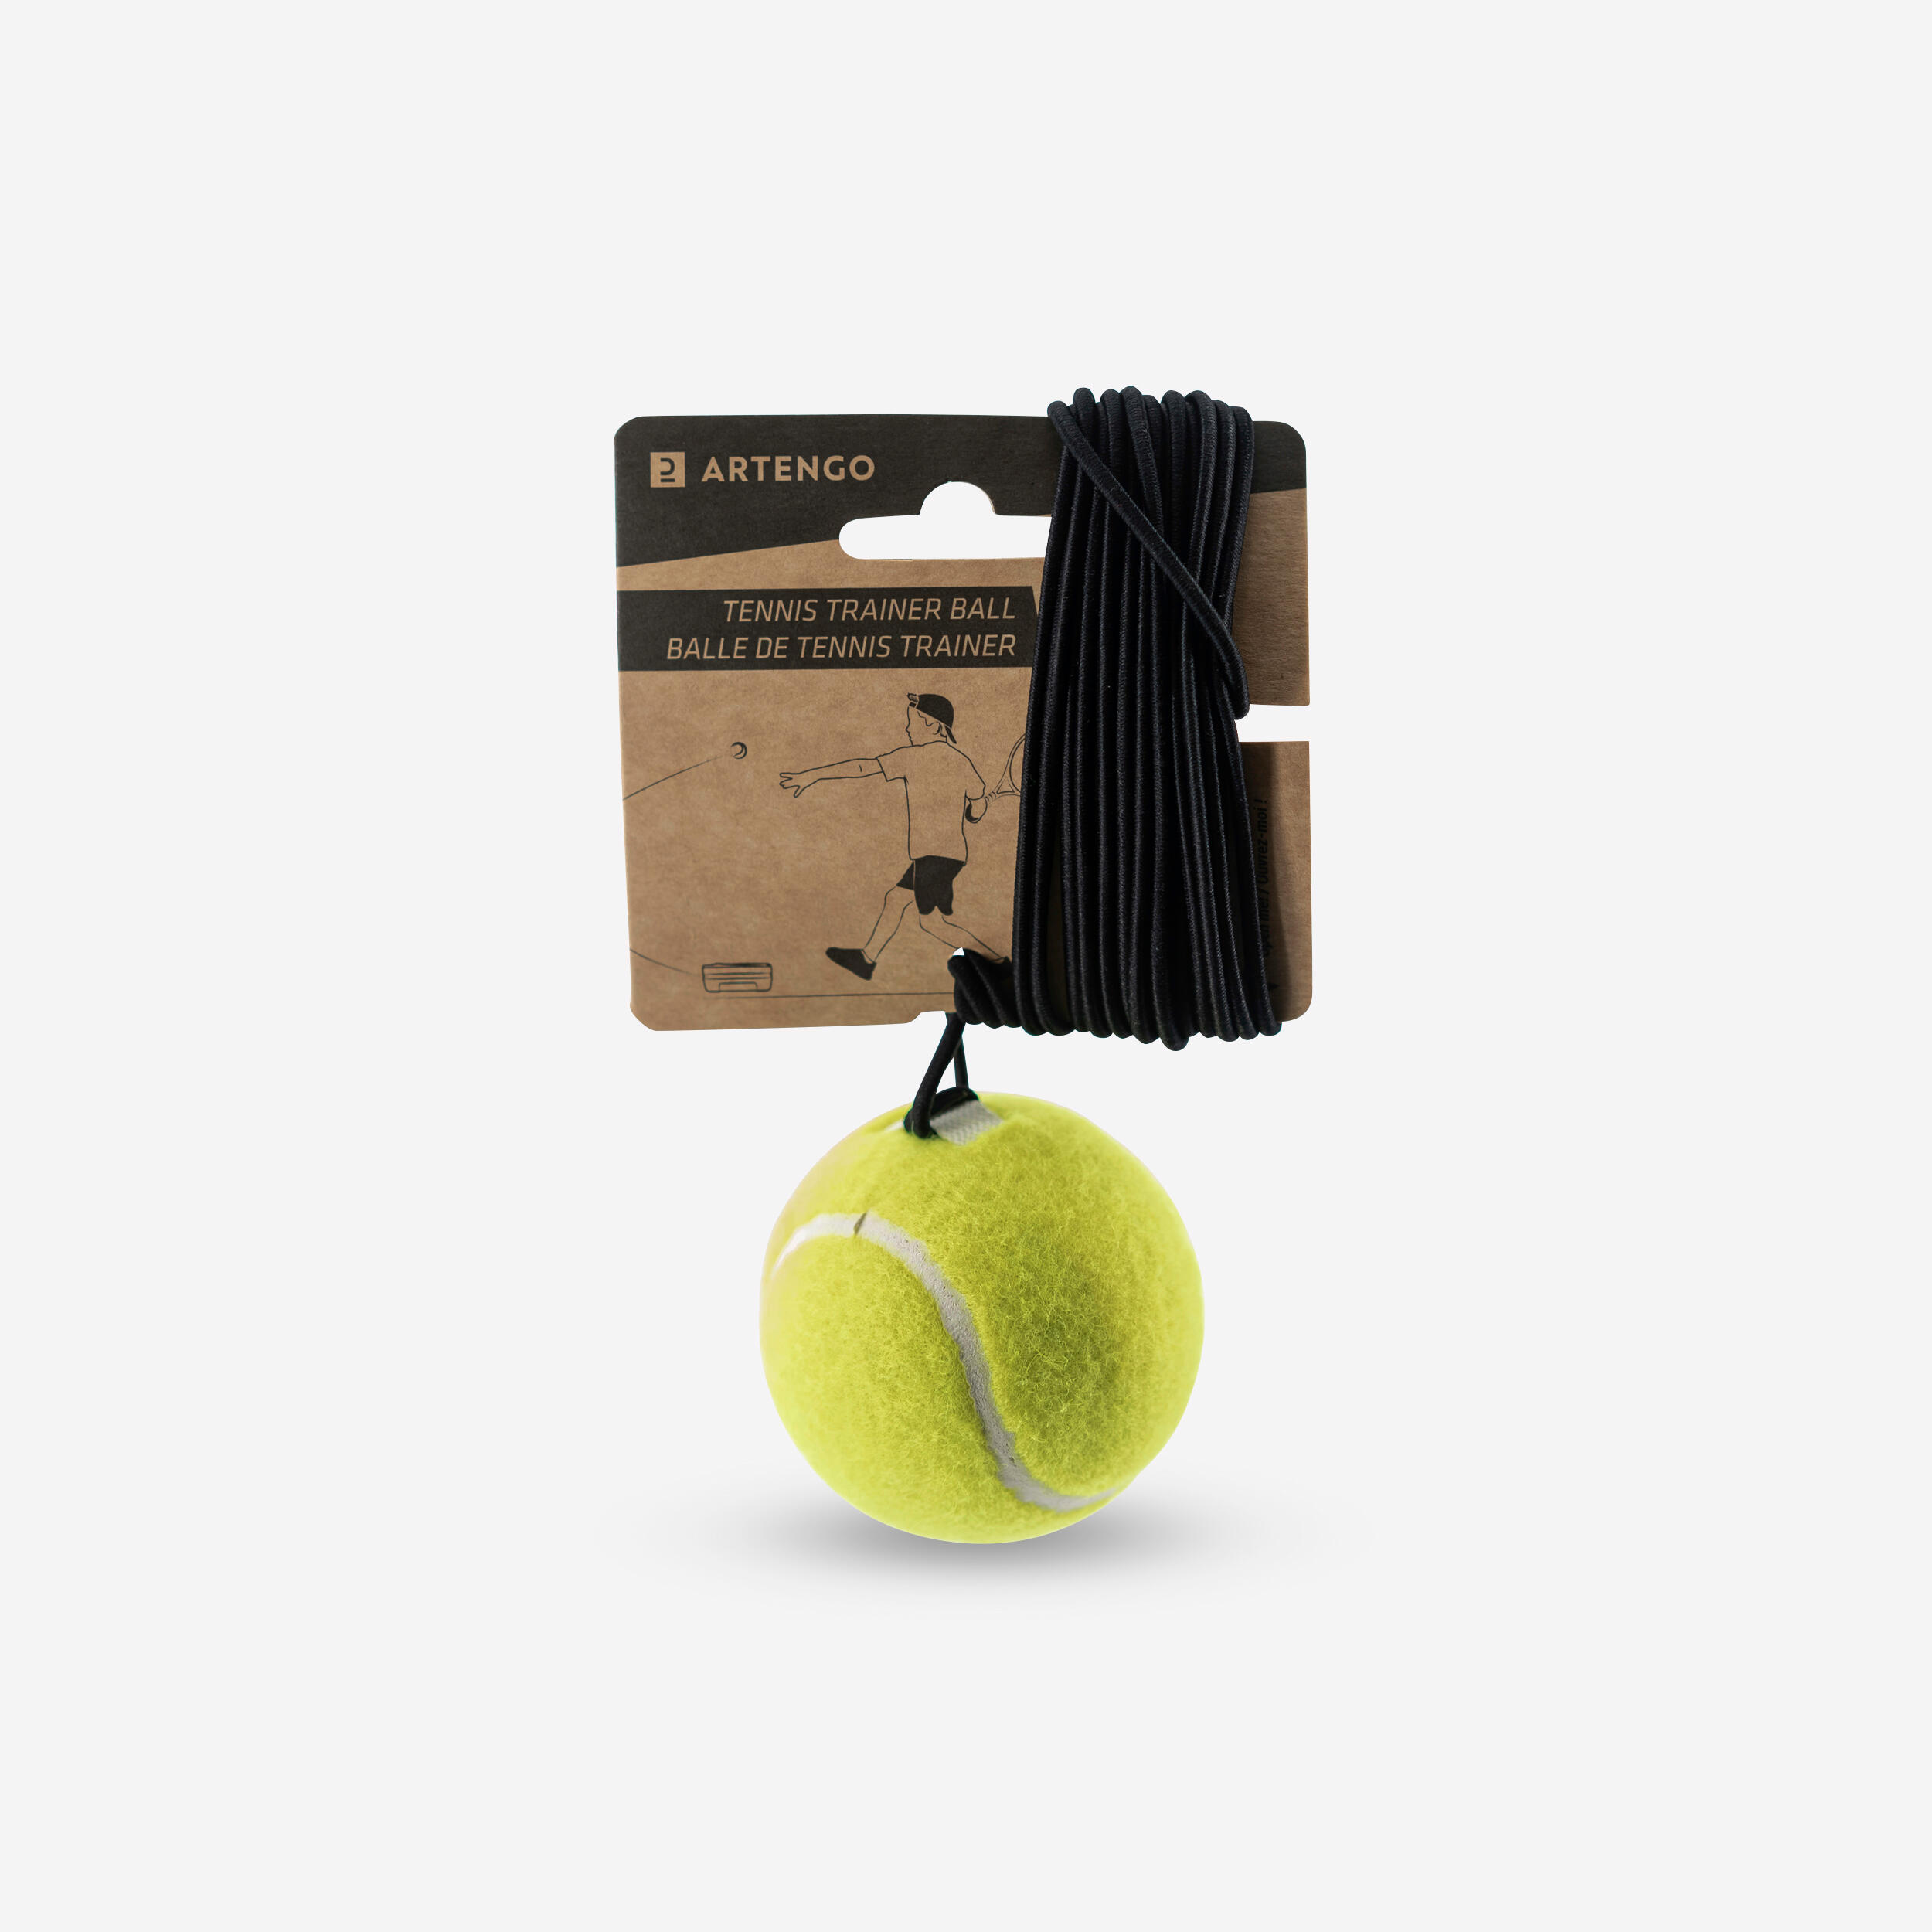 Tennis Ball and Elastic Cord for Tennis Trainer - Ball’s Back - ARTENGO